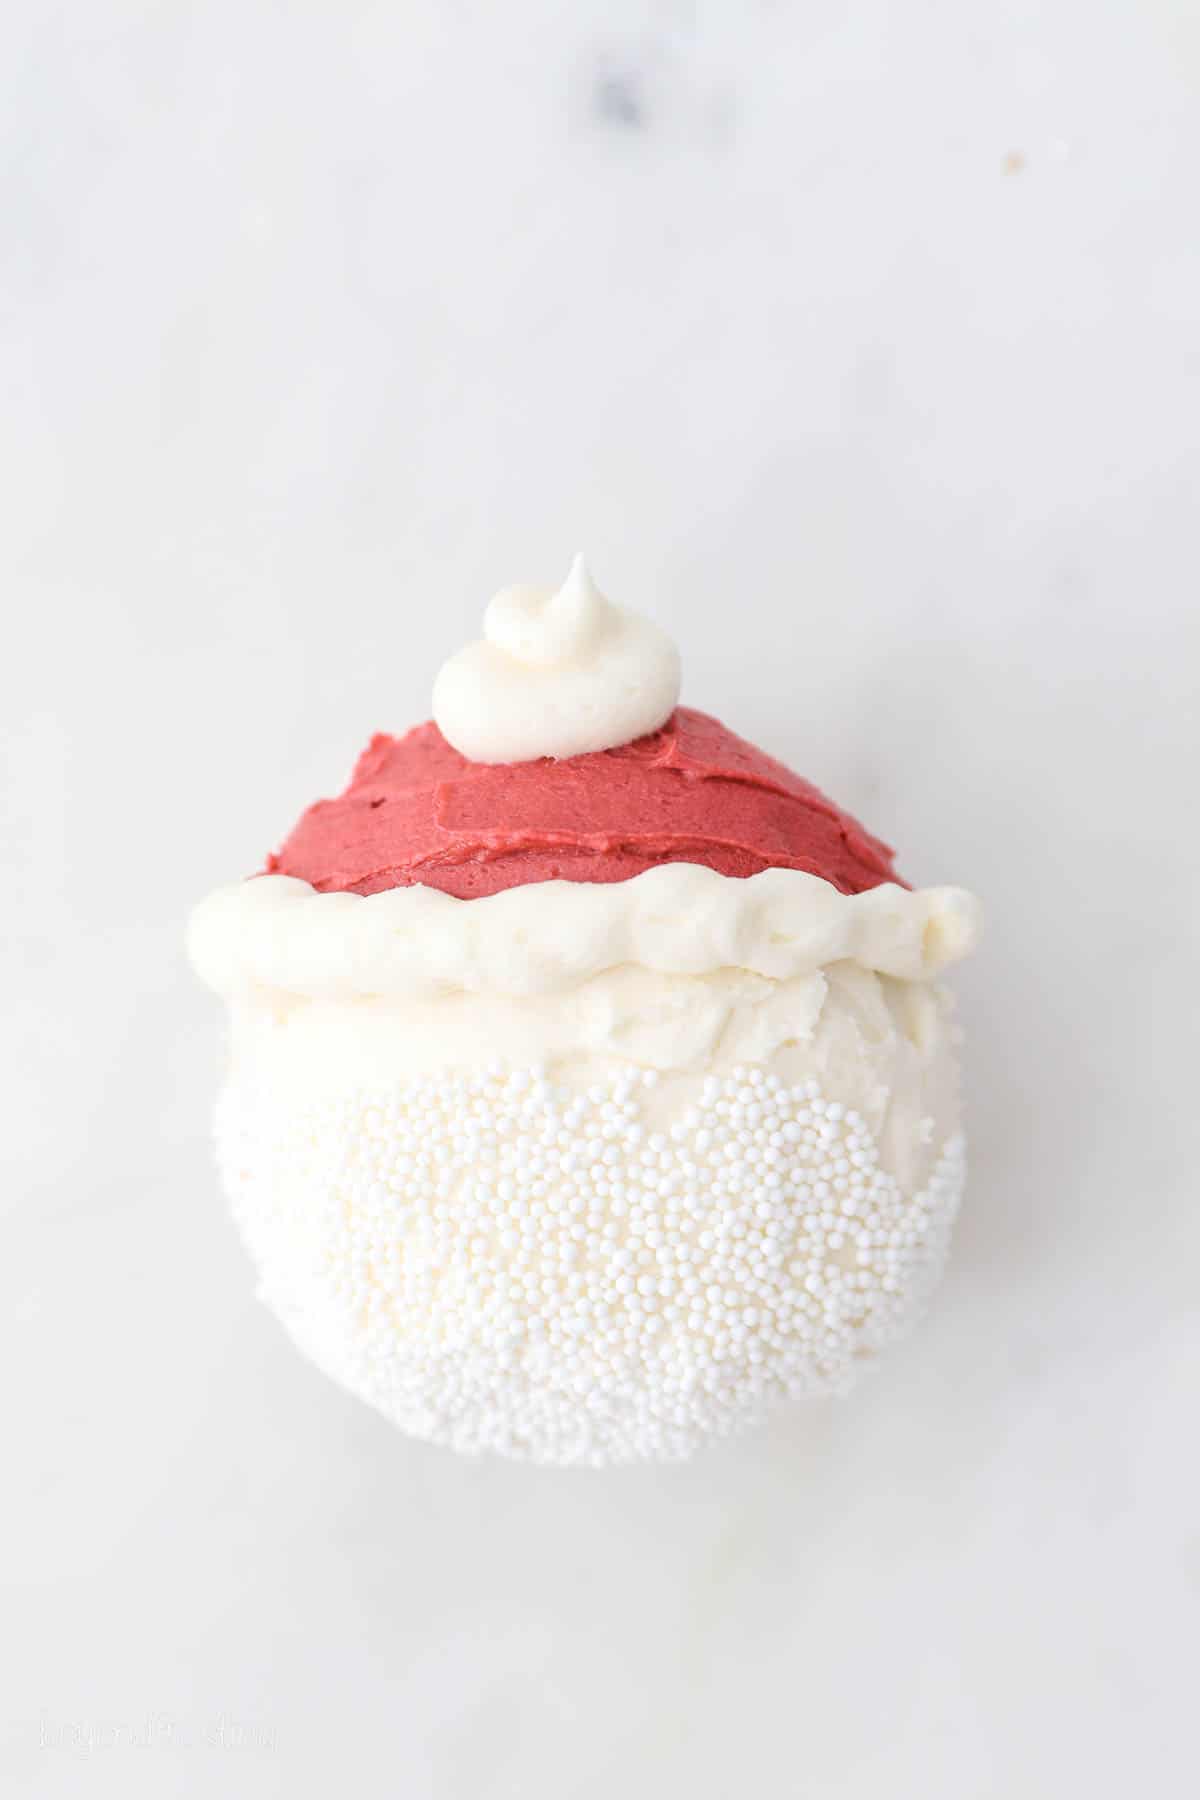 Overhead view of a cupcake partially frosted to look like Santa with a red buttercream hat and a sprinkle beard.